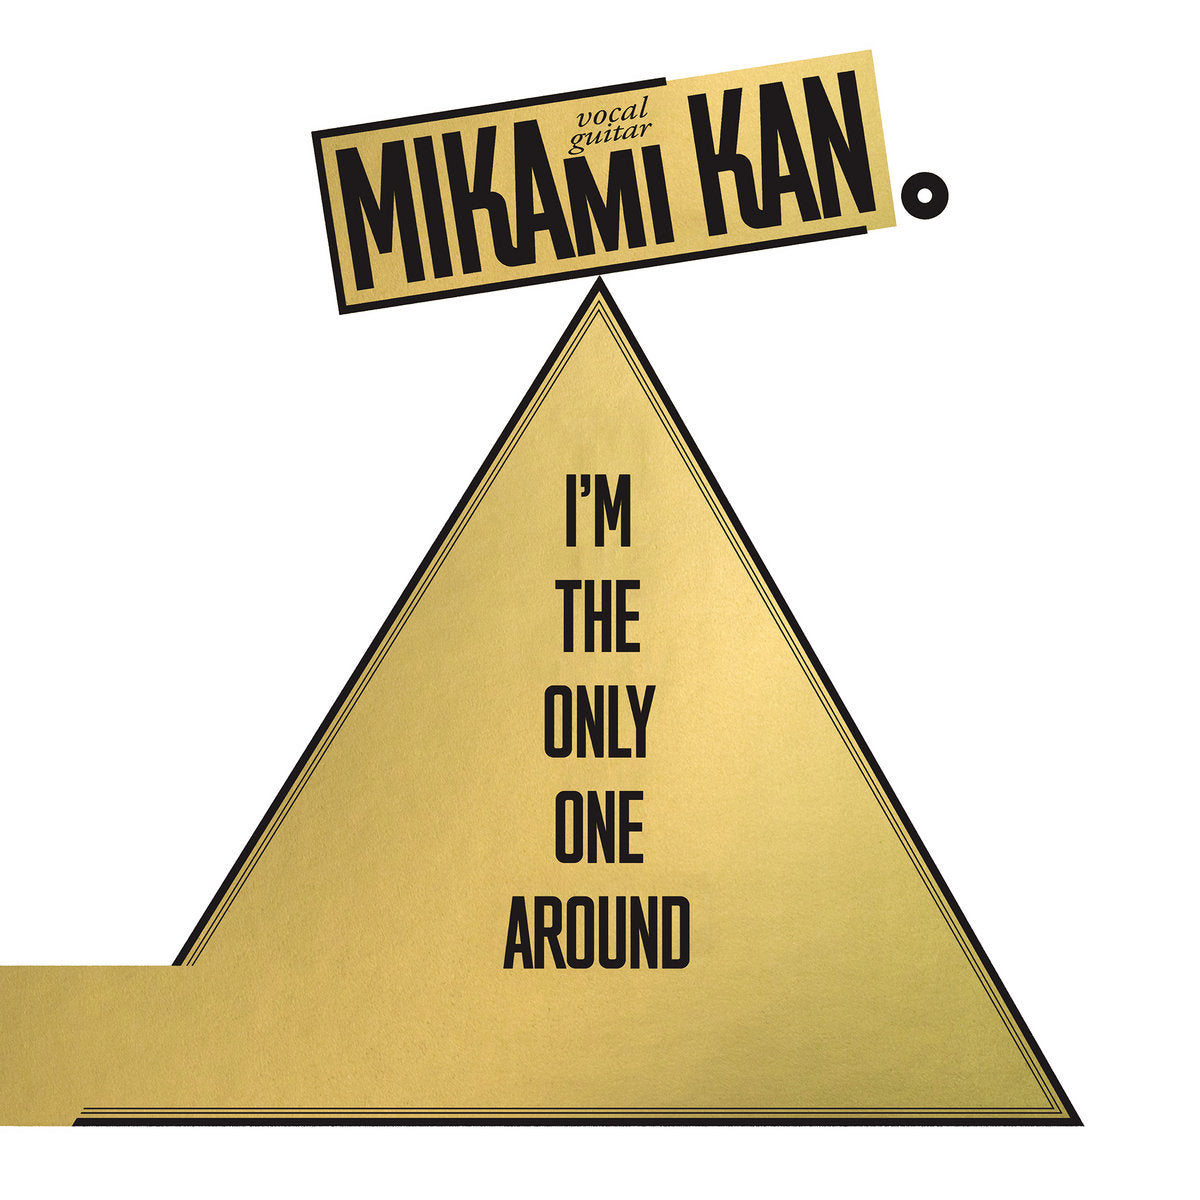 MIKAMI KAN - I'M THE ONLY ONE AROUND Vinyl LP